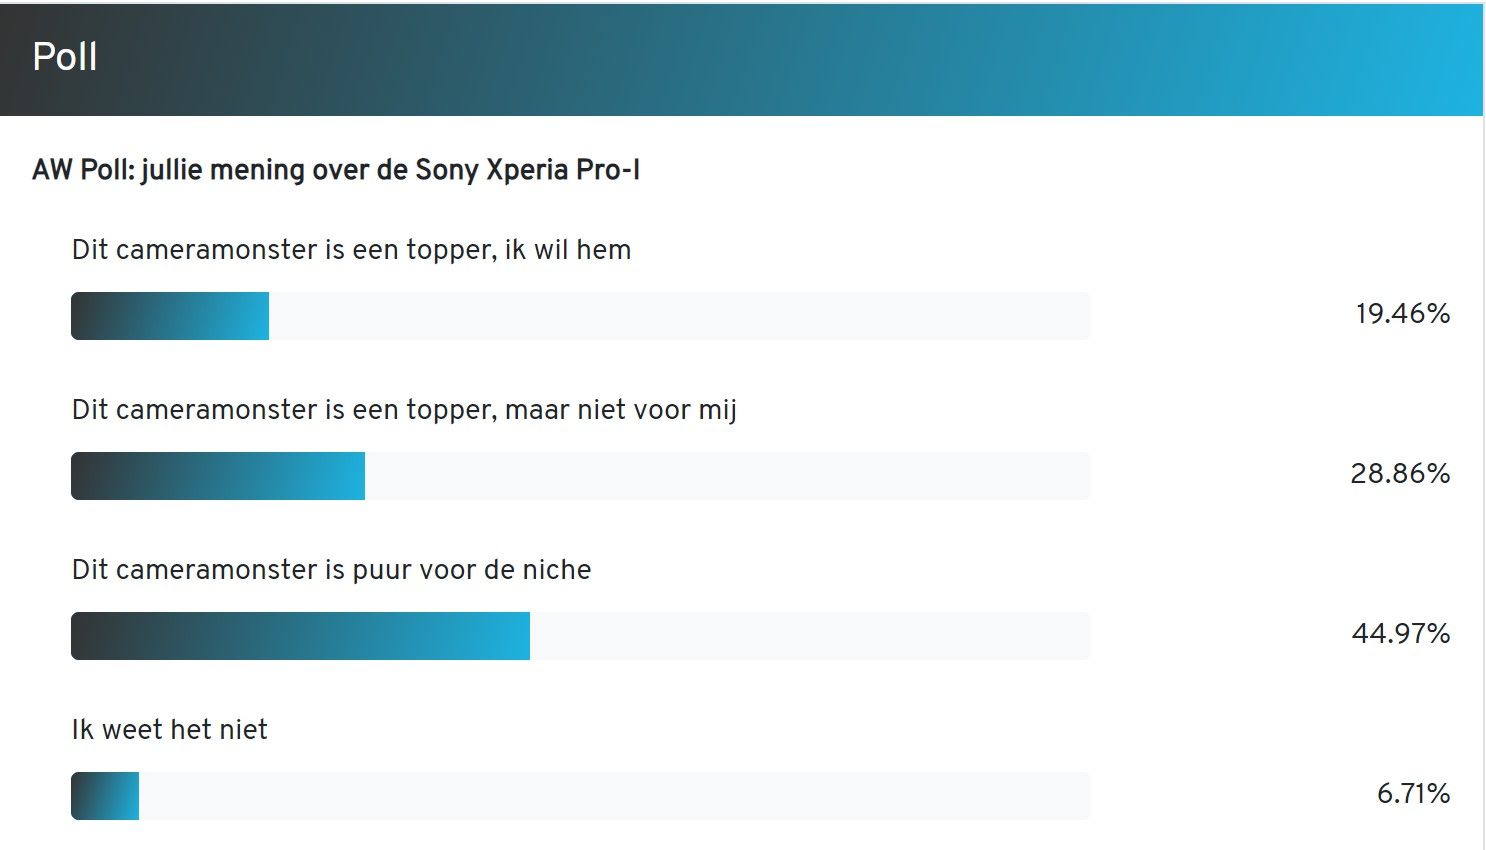 AW Poll: 45% of readers think Sony Xperia Pro-I is a niche smartphone